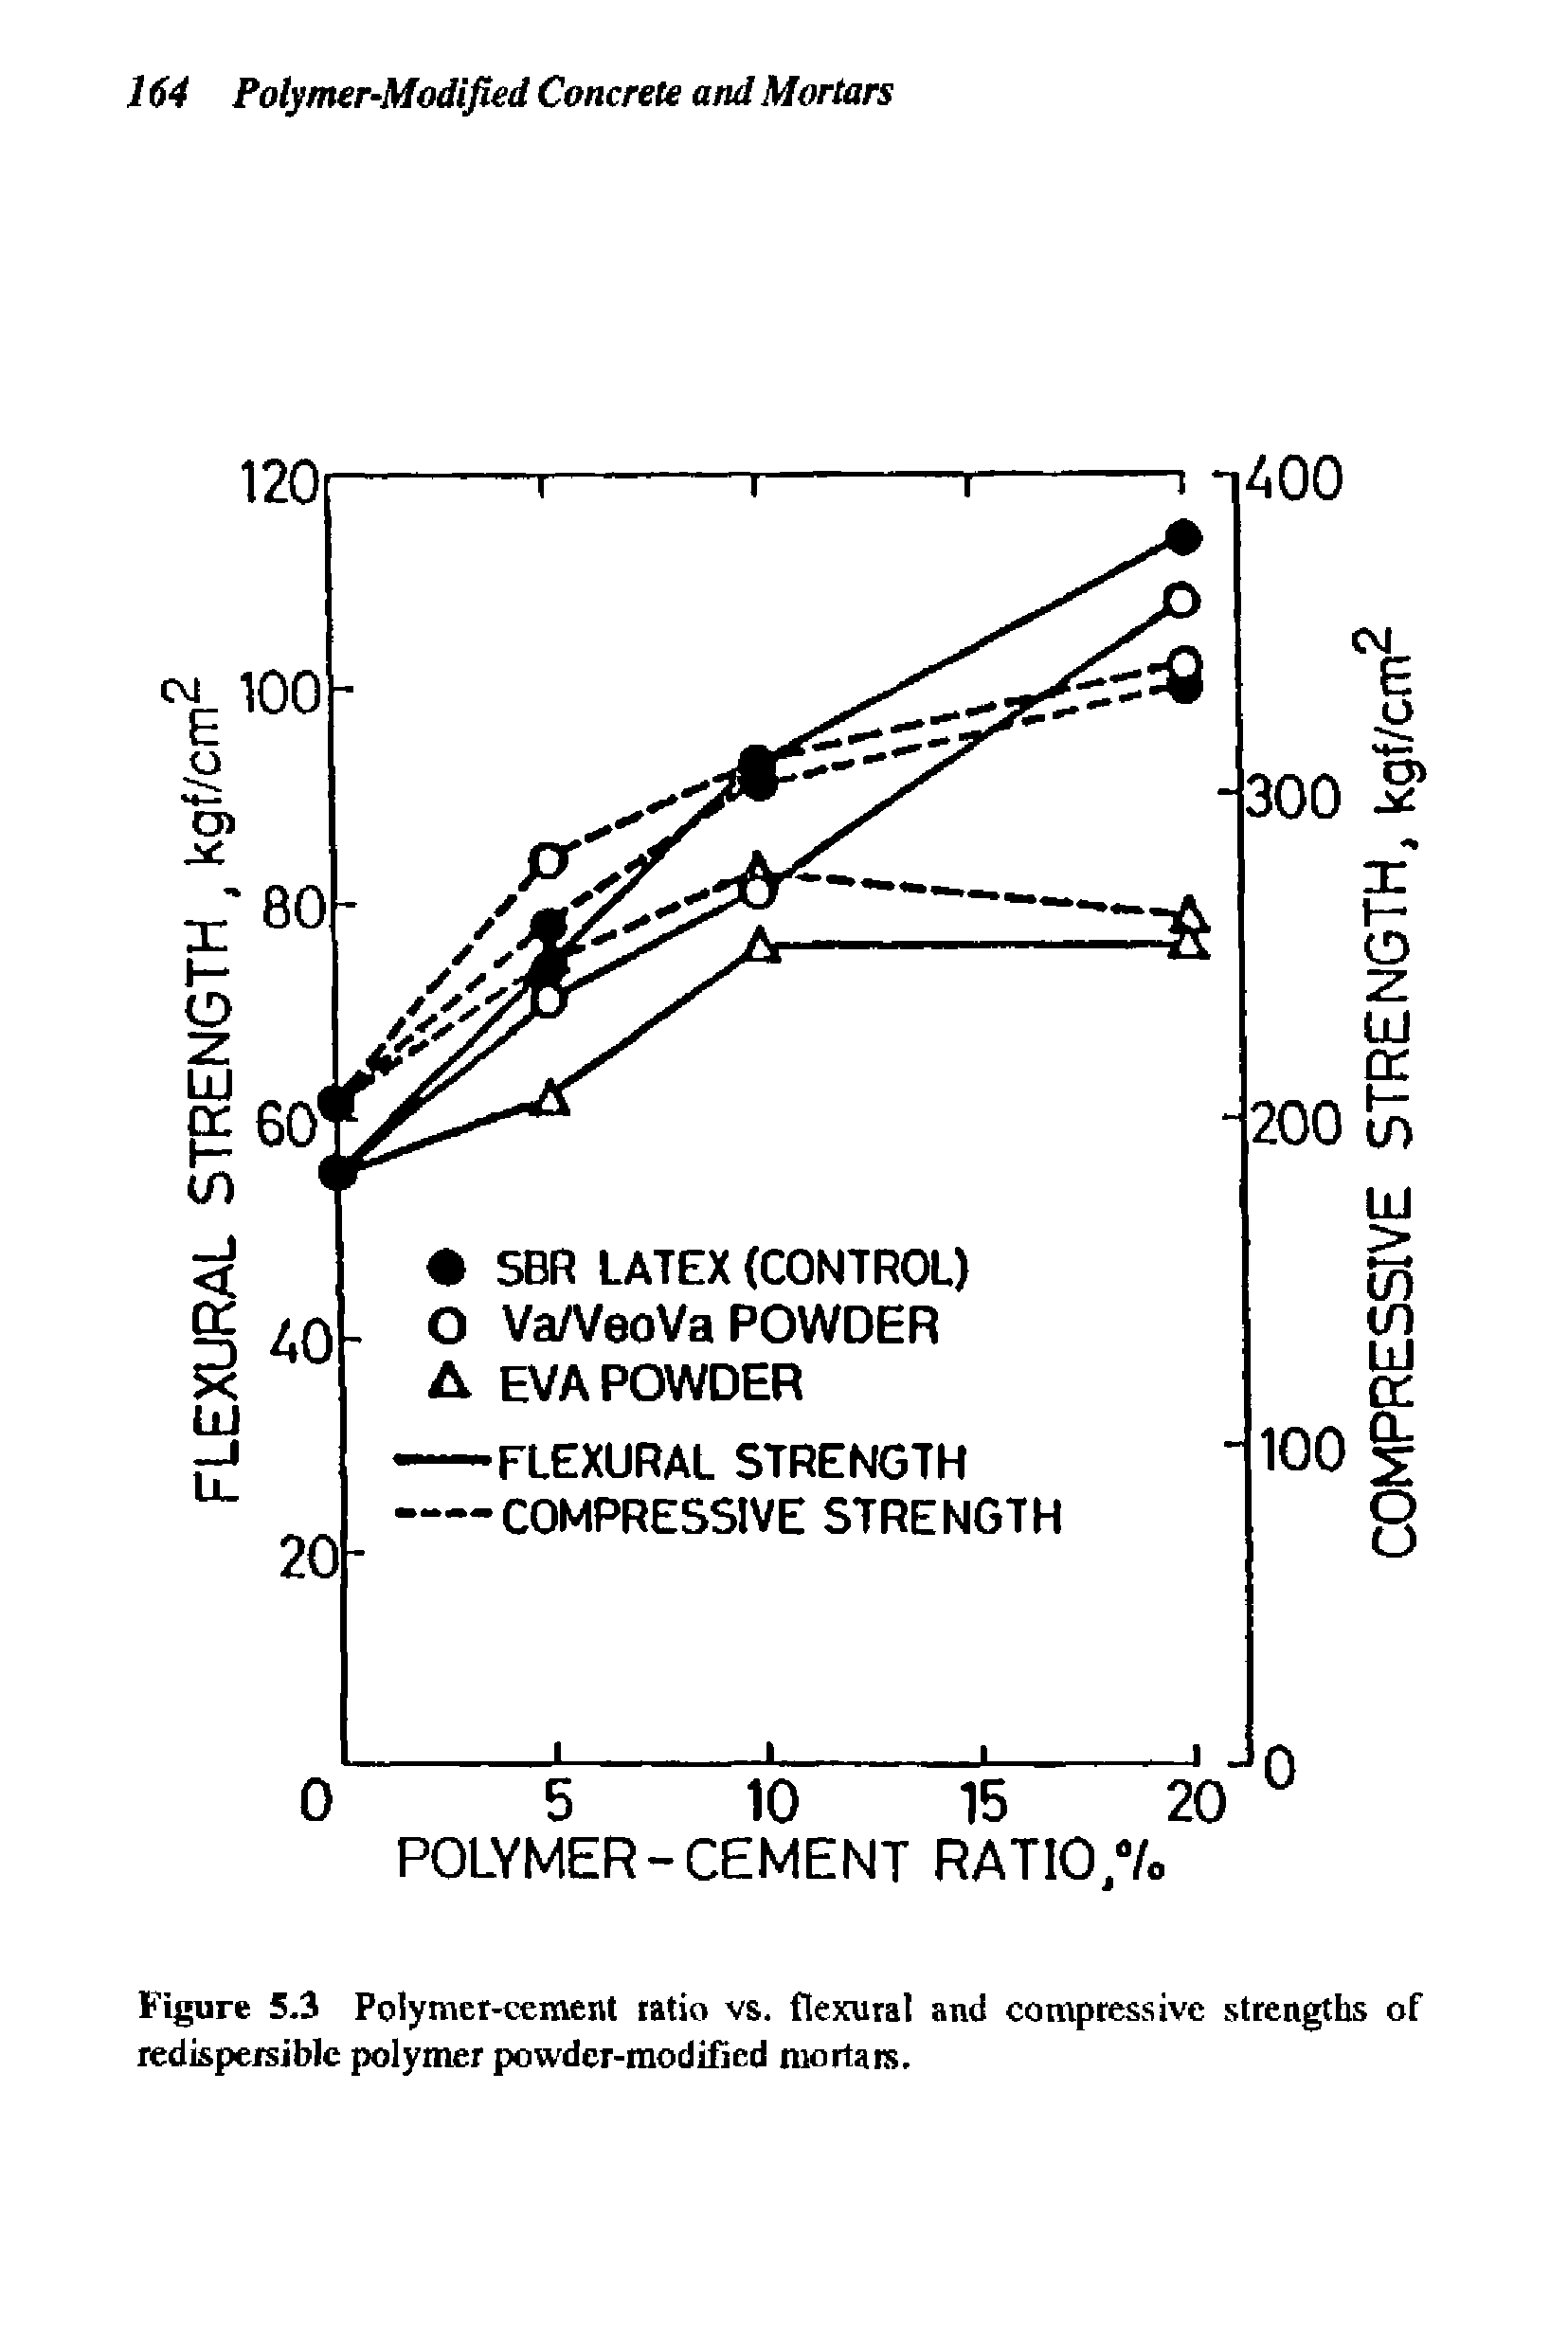 Figure 5.3 Polymer-cement ratio vs. flexural and compressive strengths of redispersible polymer powder-modified mortars.